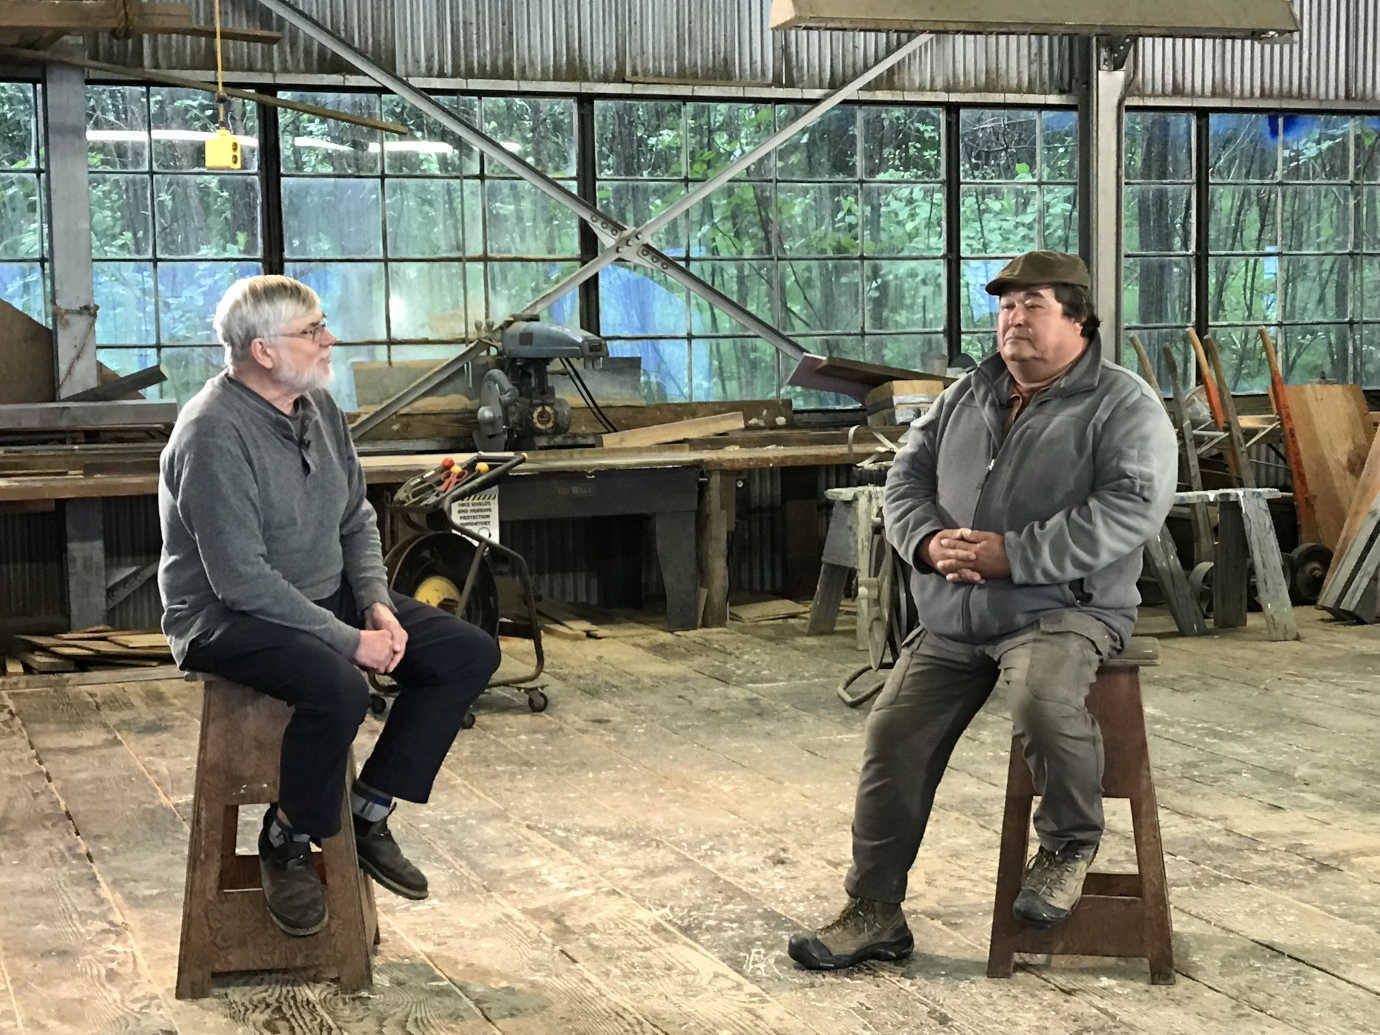 Project Historian Bob King interviews former spring/fall cannery crewmember Bruce Anderson in the Diamond NN Cannery’s Carpenter Shop in July 2019. Image courtesy of the NN Cannery History Project.